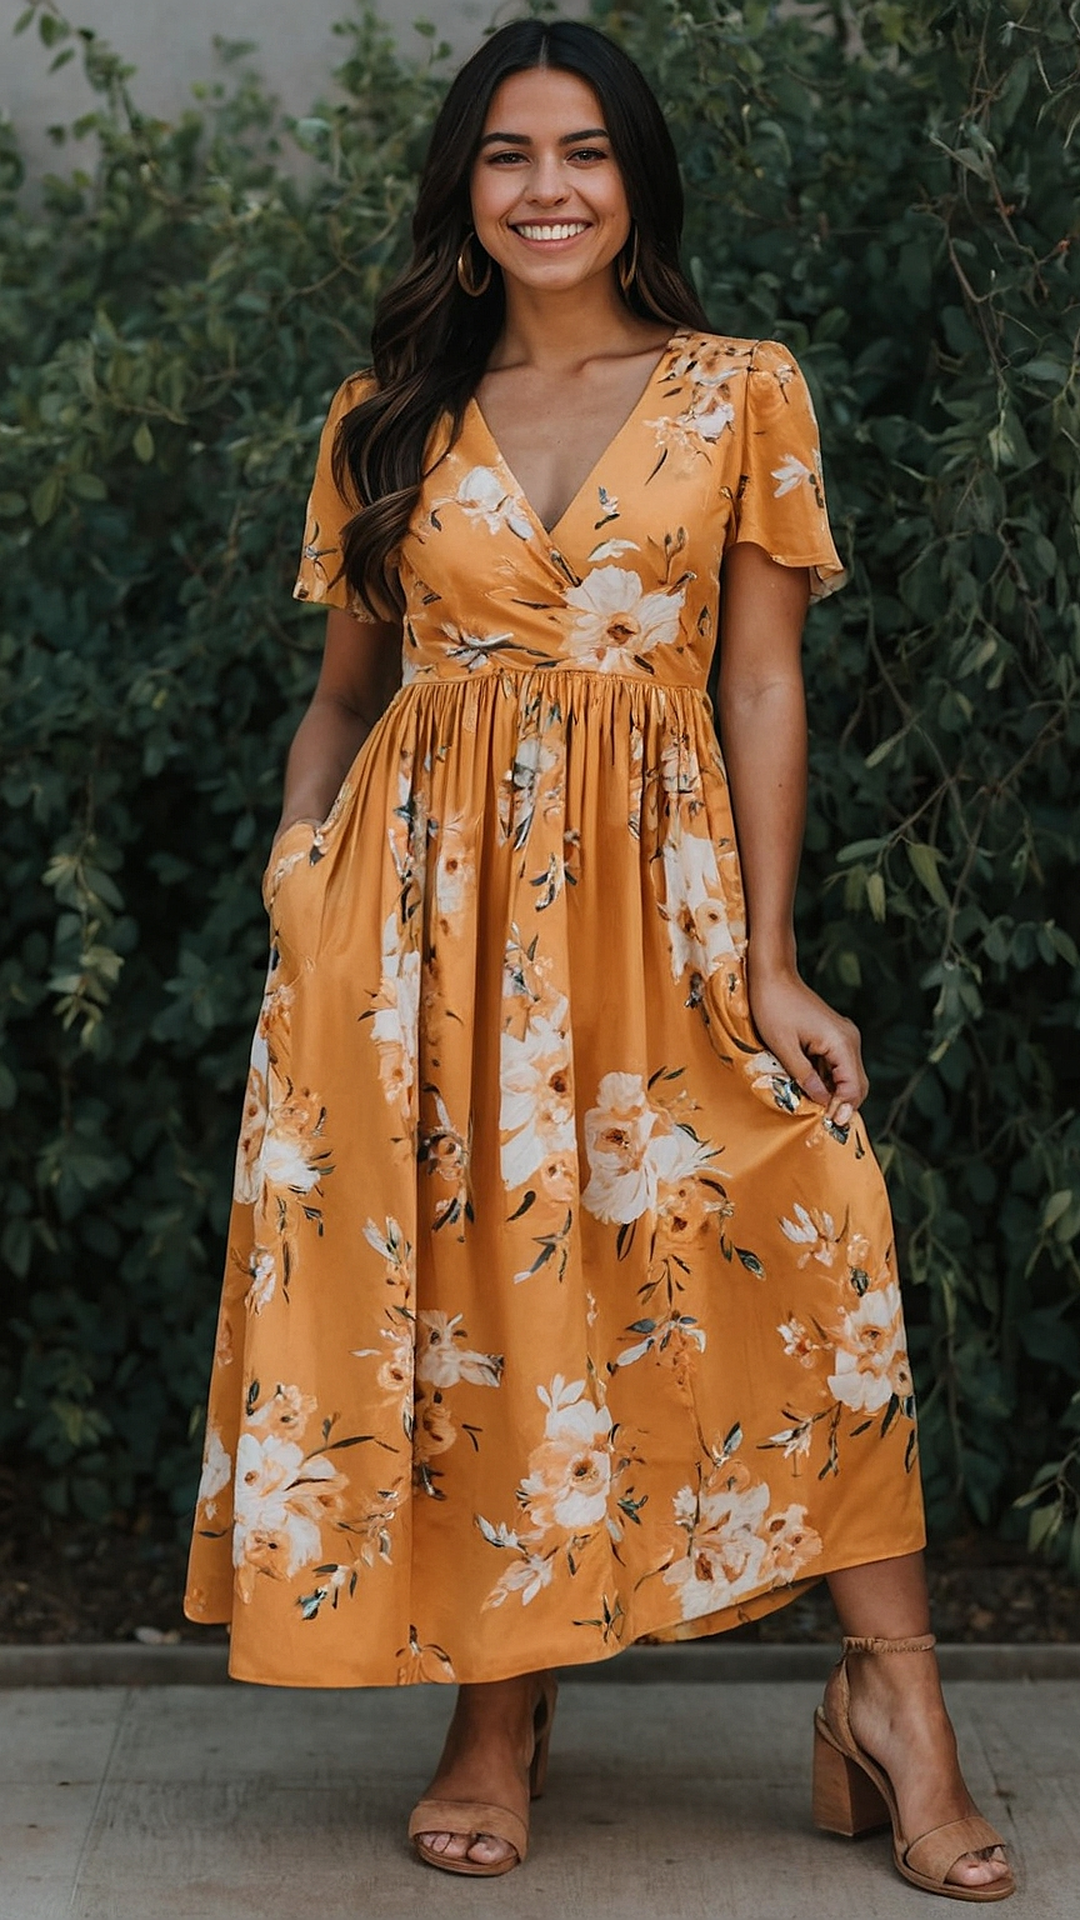 Modern and Classy: The Best Graduation Dress Ideas for 2022